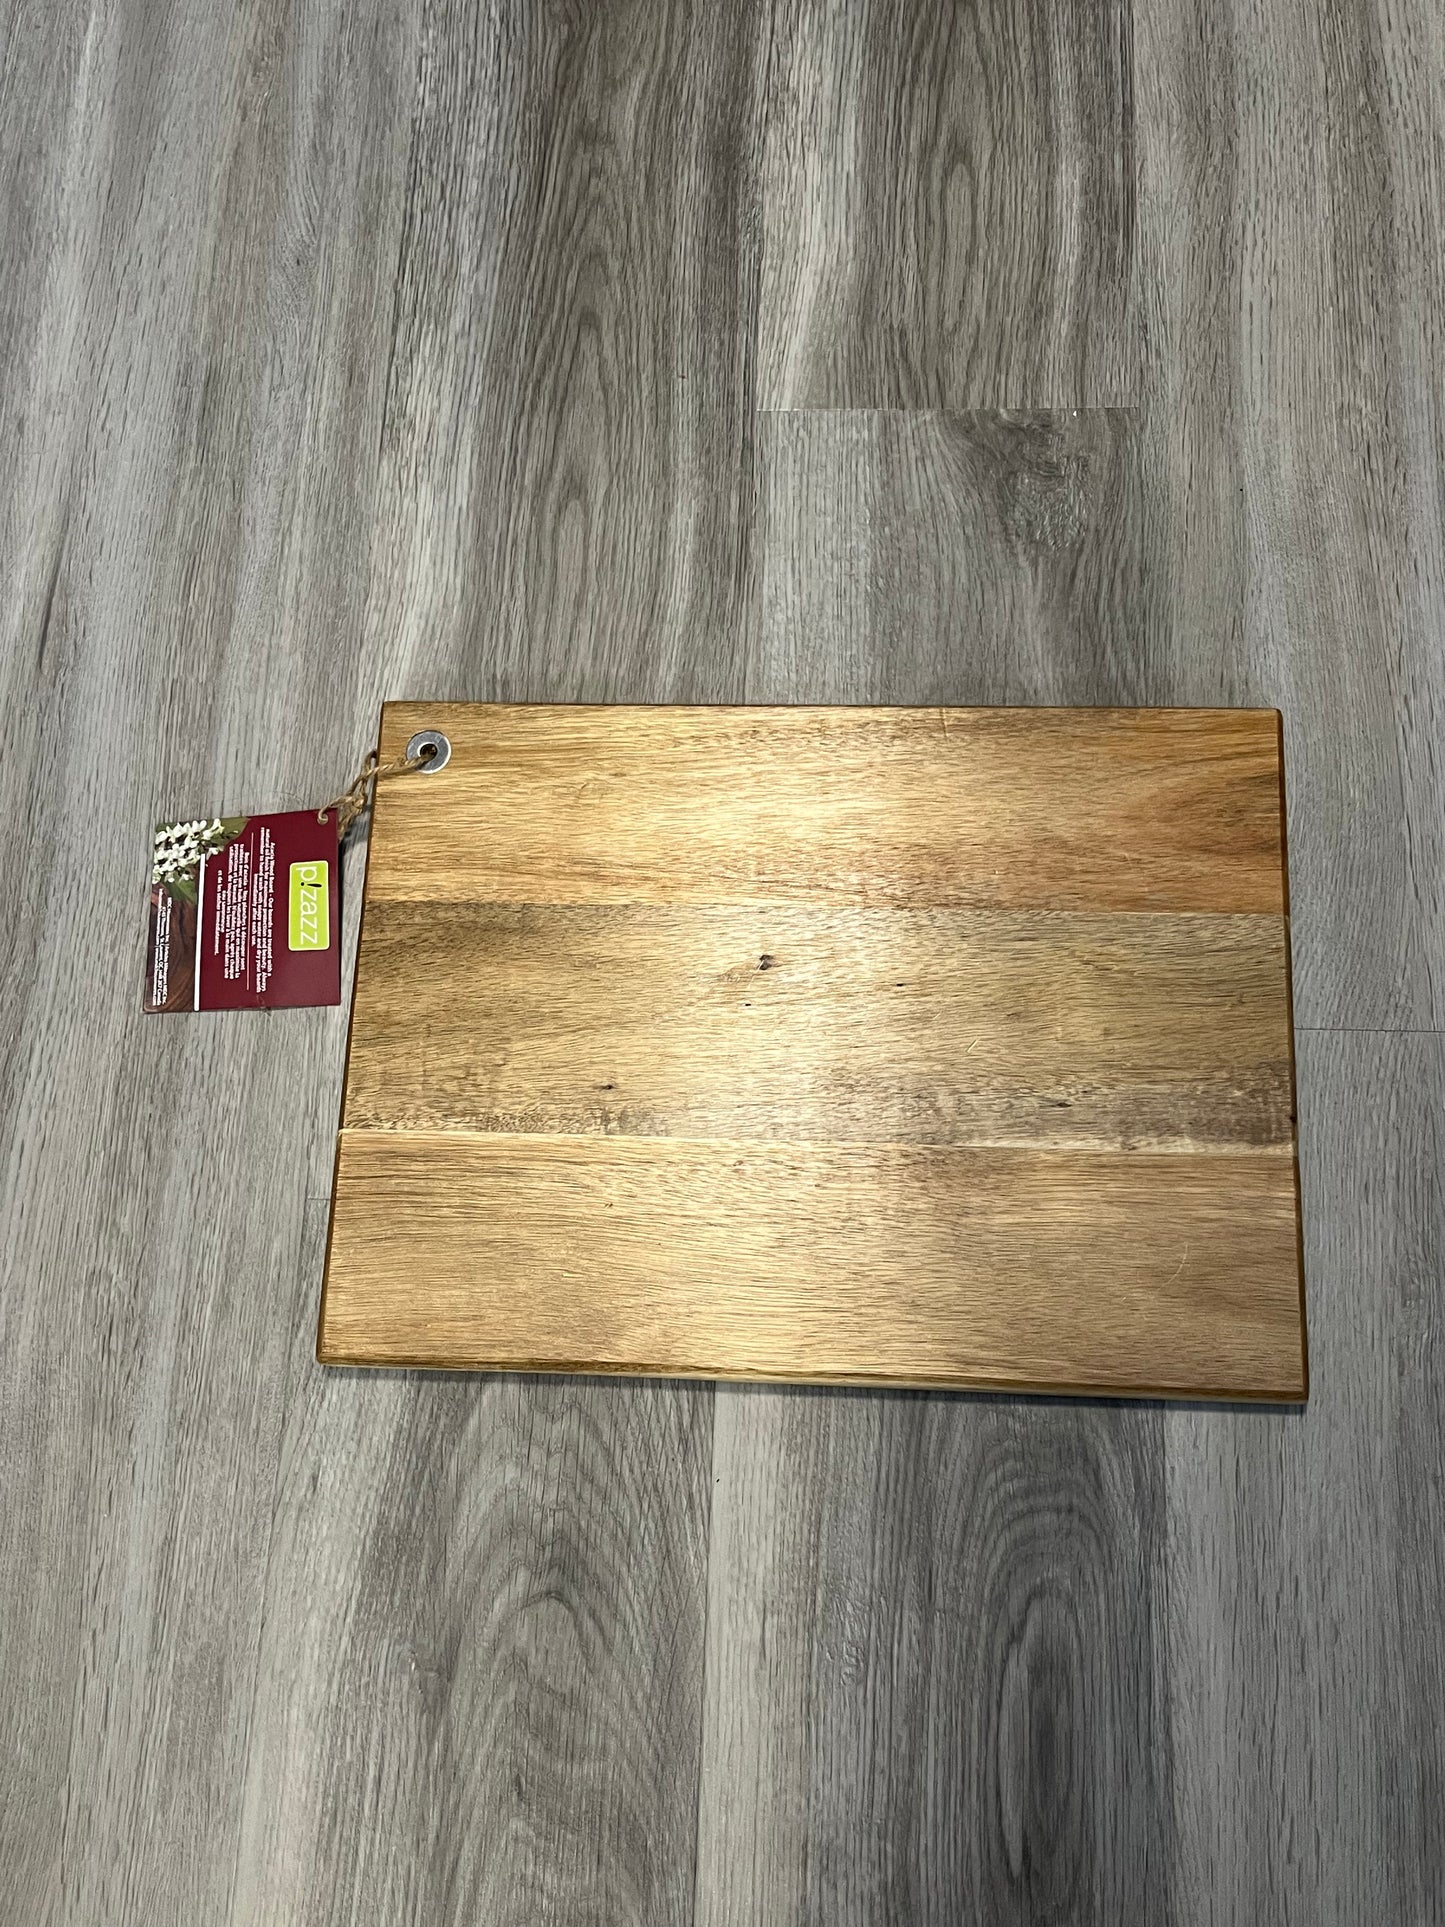 Cutting Boards - Pick a cutting board to engrave